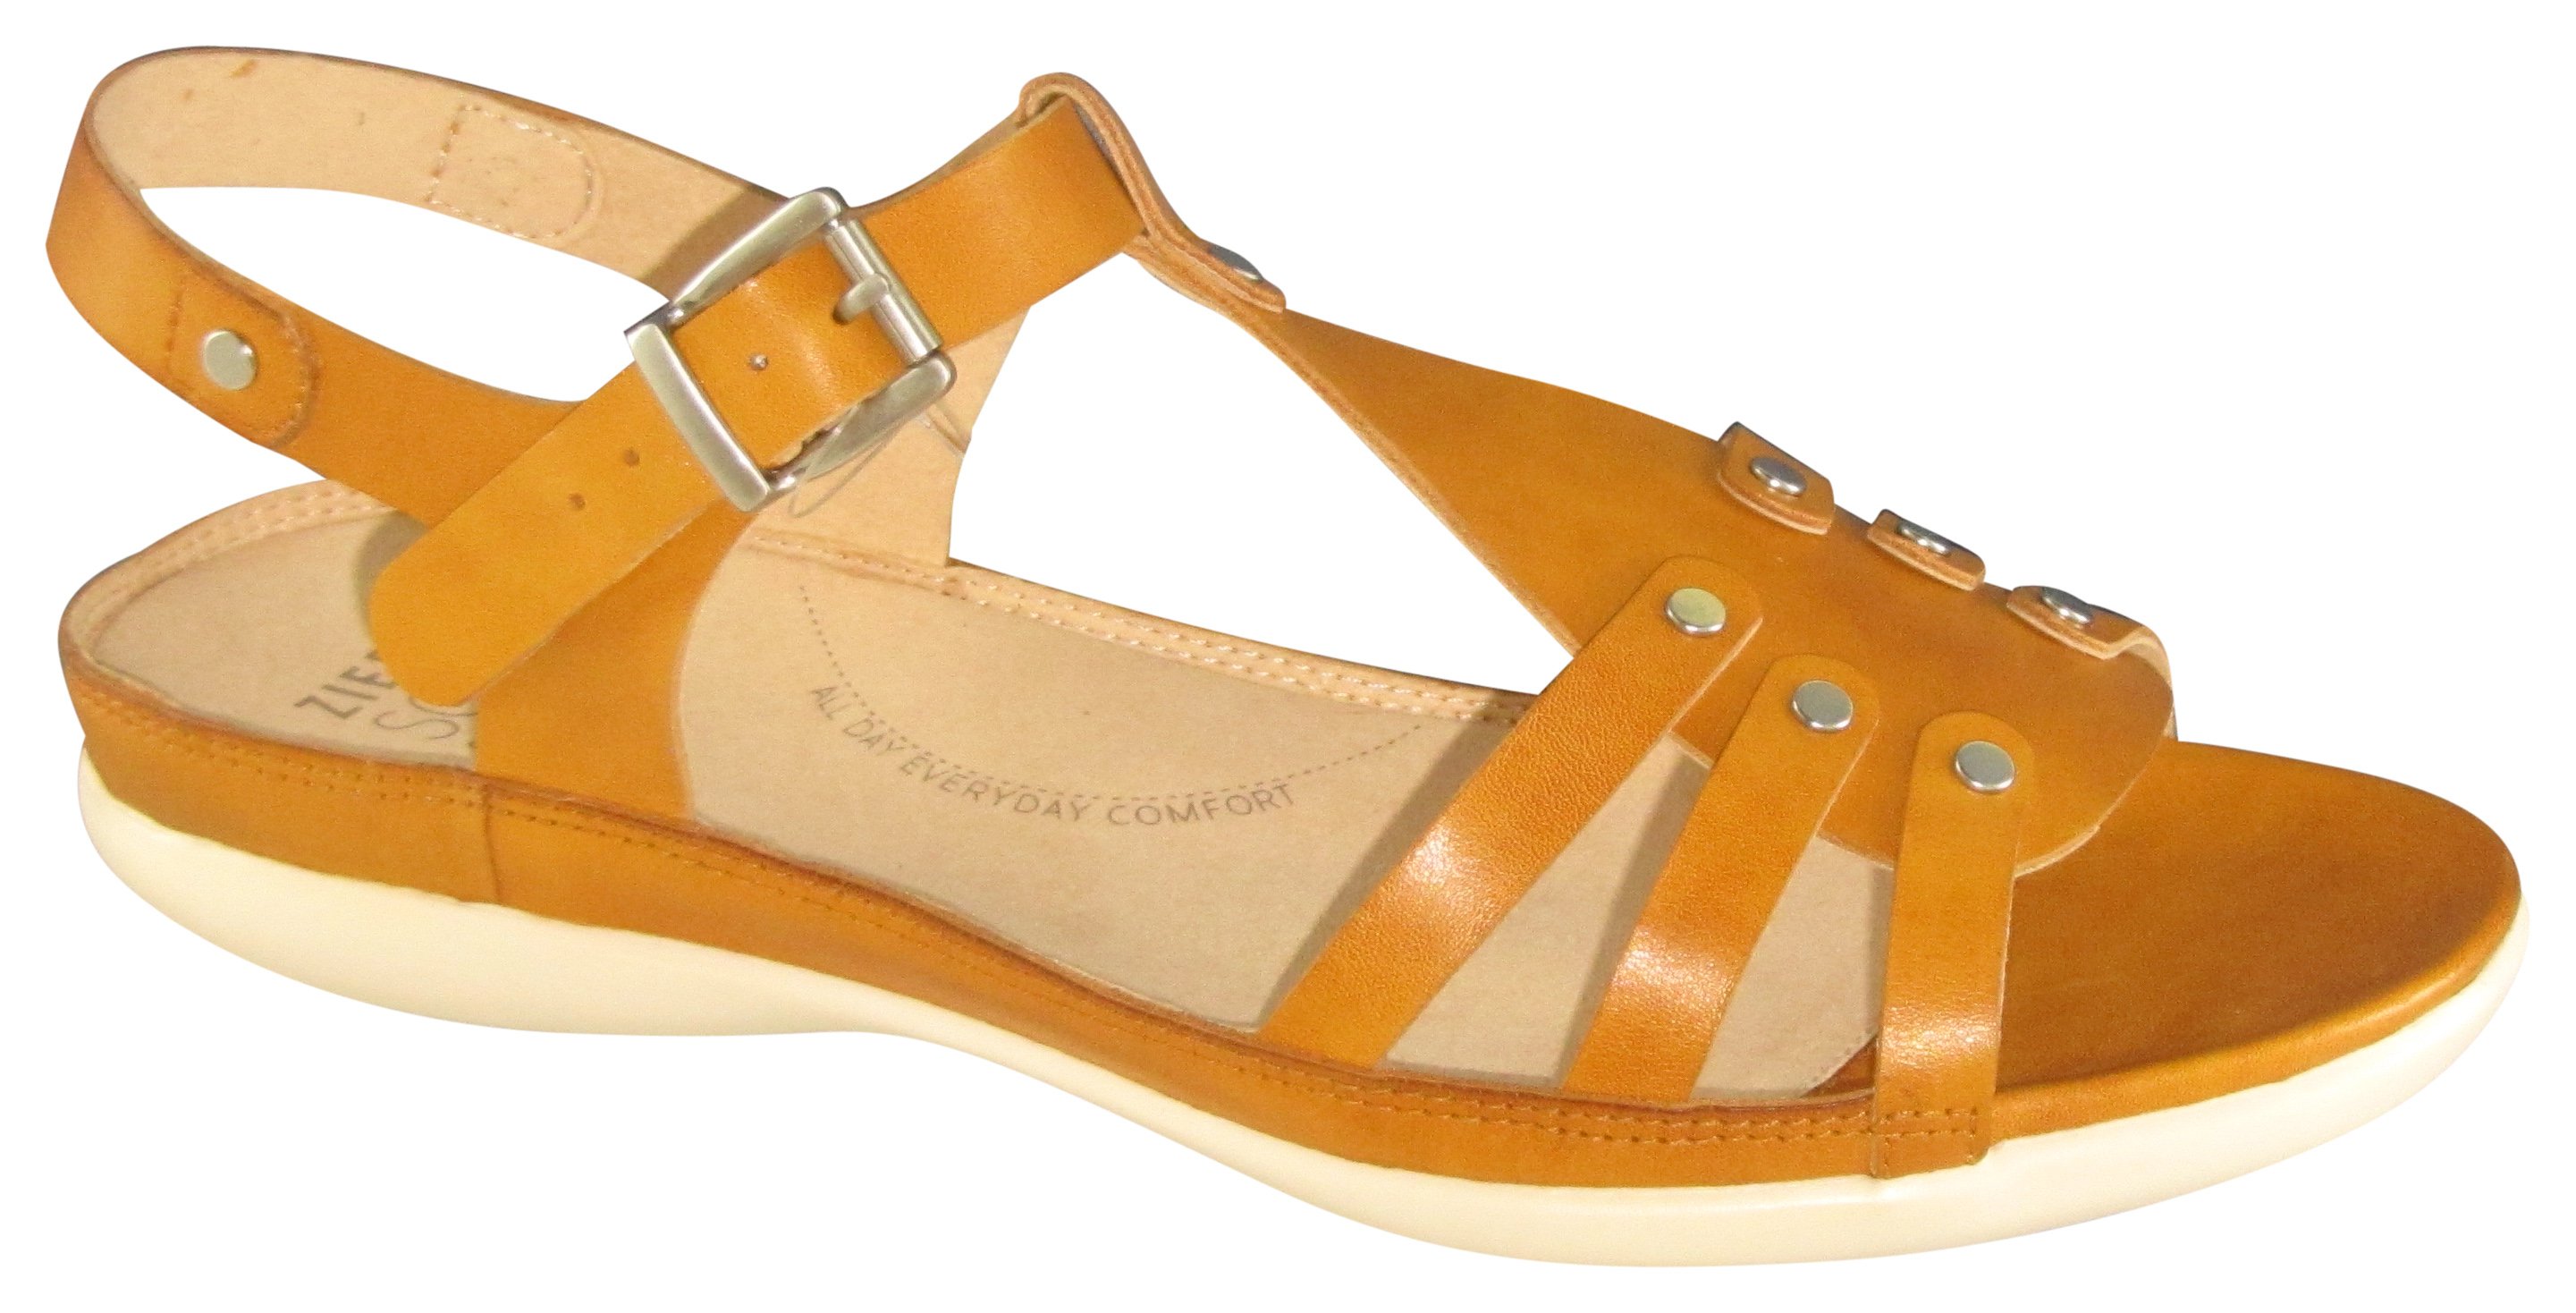 BROOKLYN ZIERA - WOMENS SHOES-SANDALS - low to flat : Shirley's Shoes ...